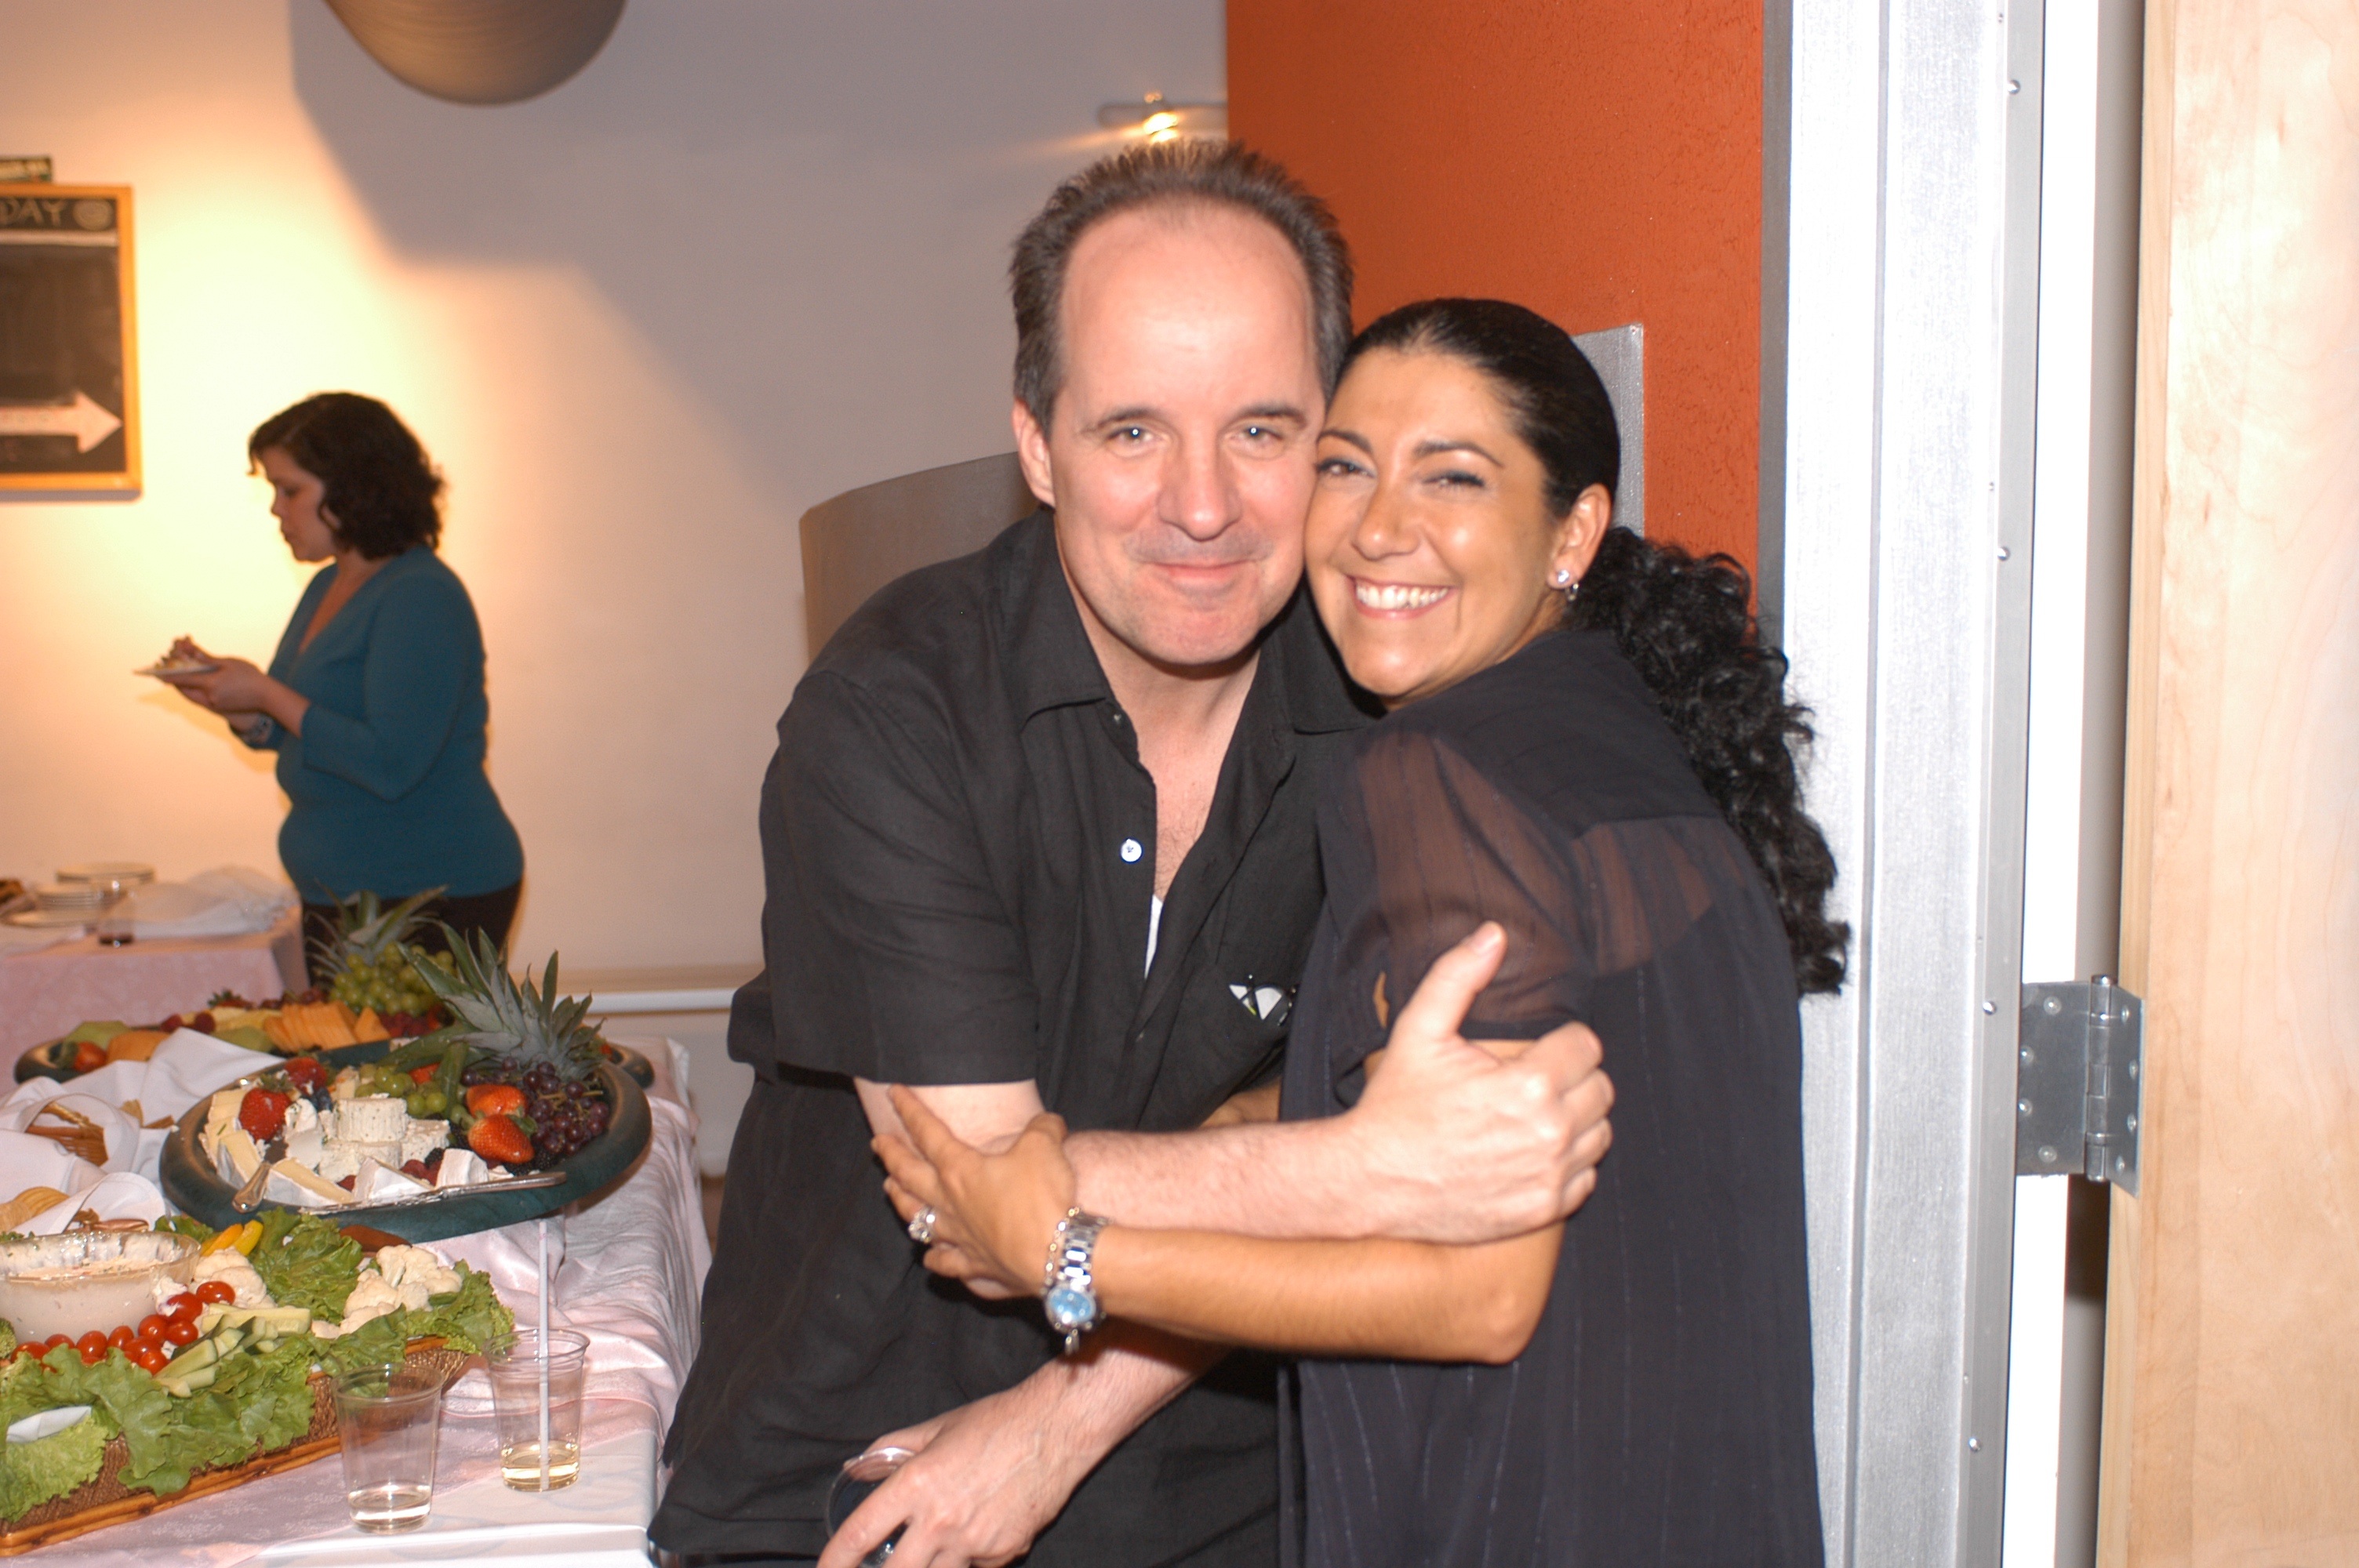 Toni D'Antonio and John Pankow at Endeavor Studios, NYC for the first workshop reading of the feature film script, ALTO by Mikki del Monico. Produced by Shake The Tree Productions 2007